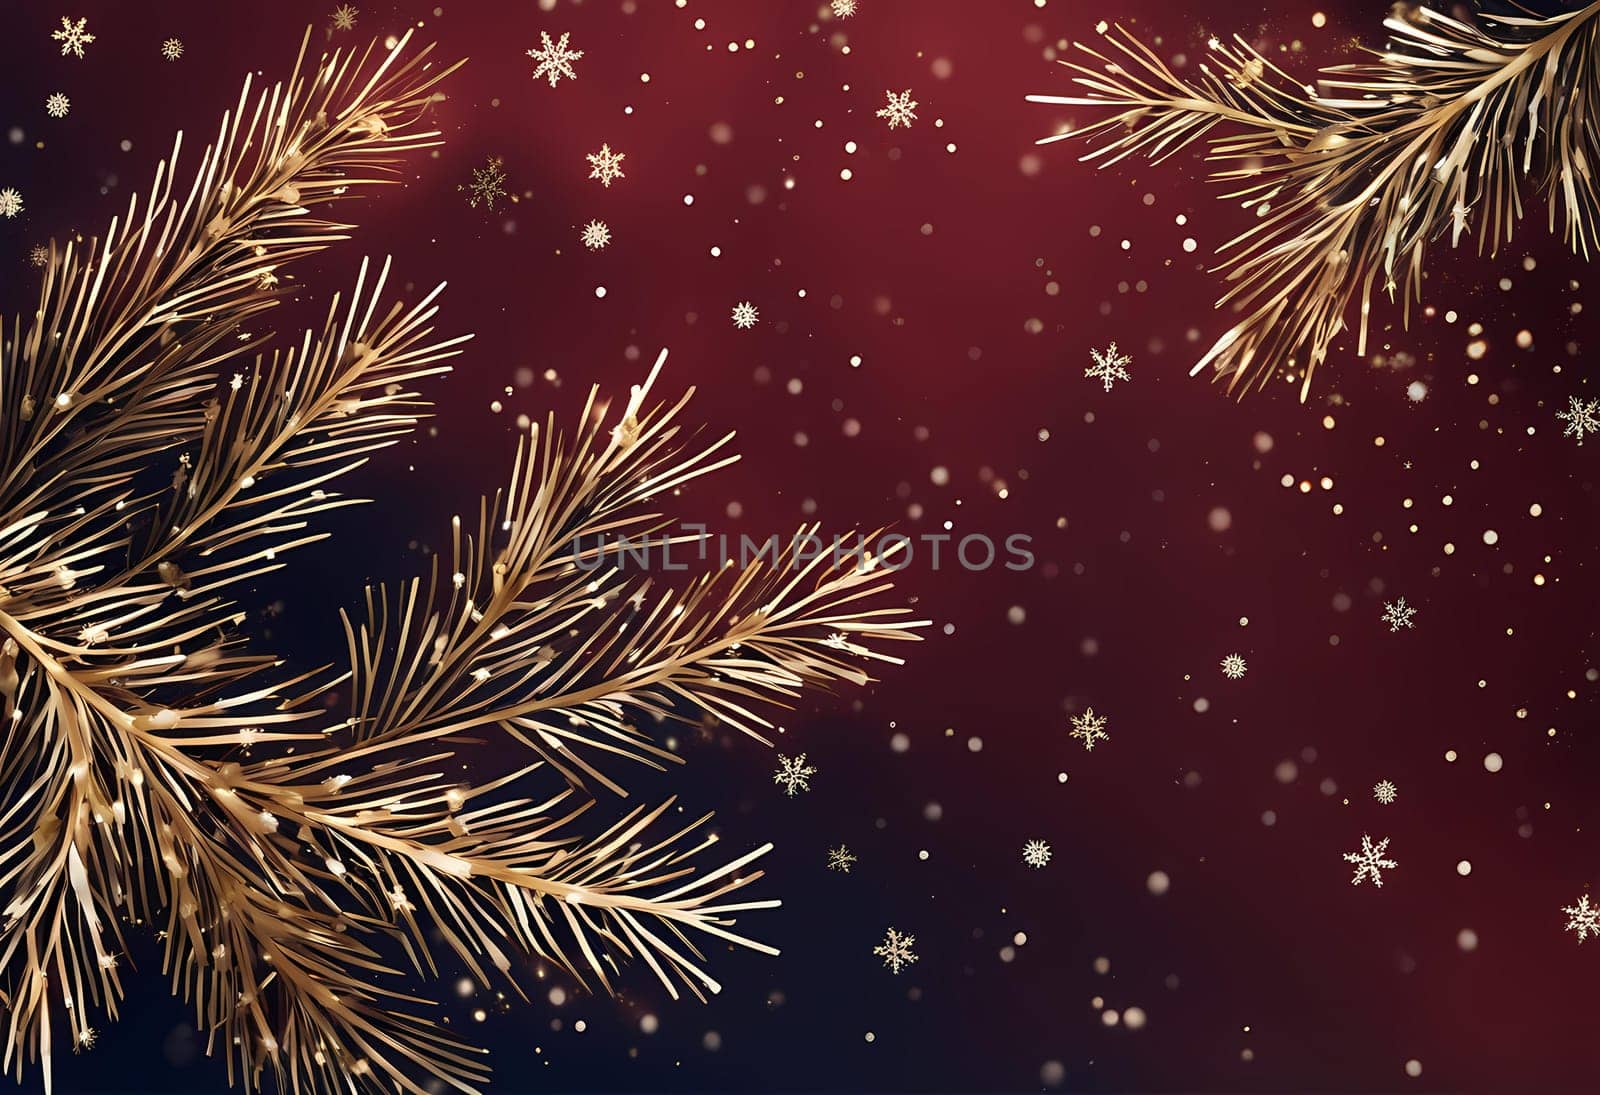 Winter background with pine branches on a dark red background. Gold stars and white, shiny snowflakes Generate AI